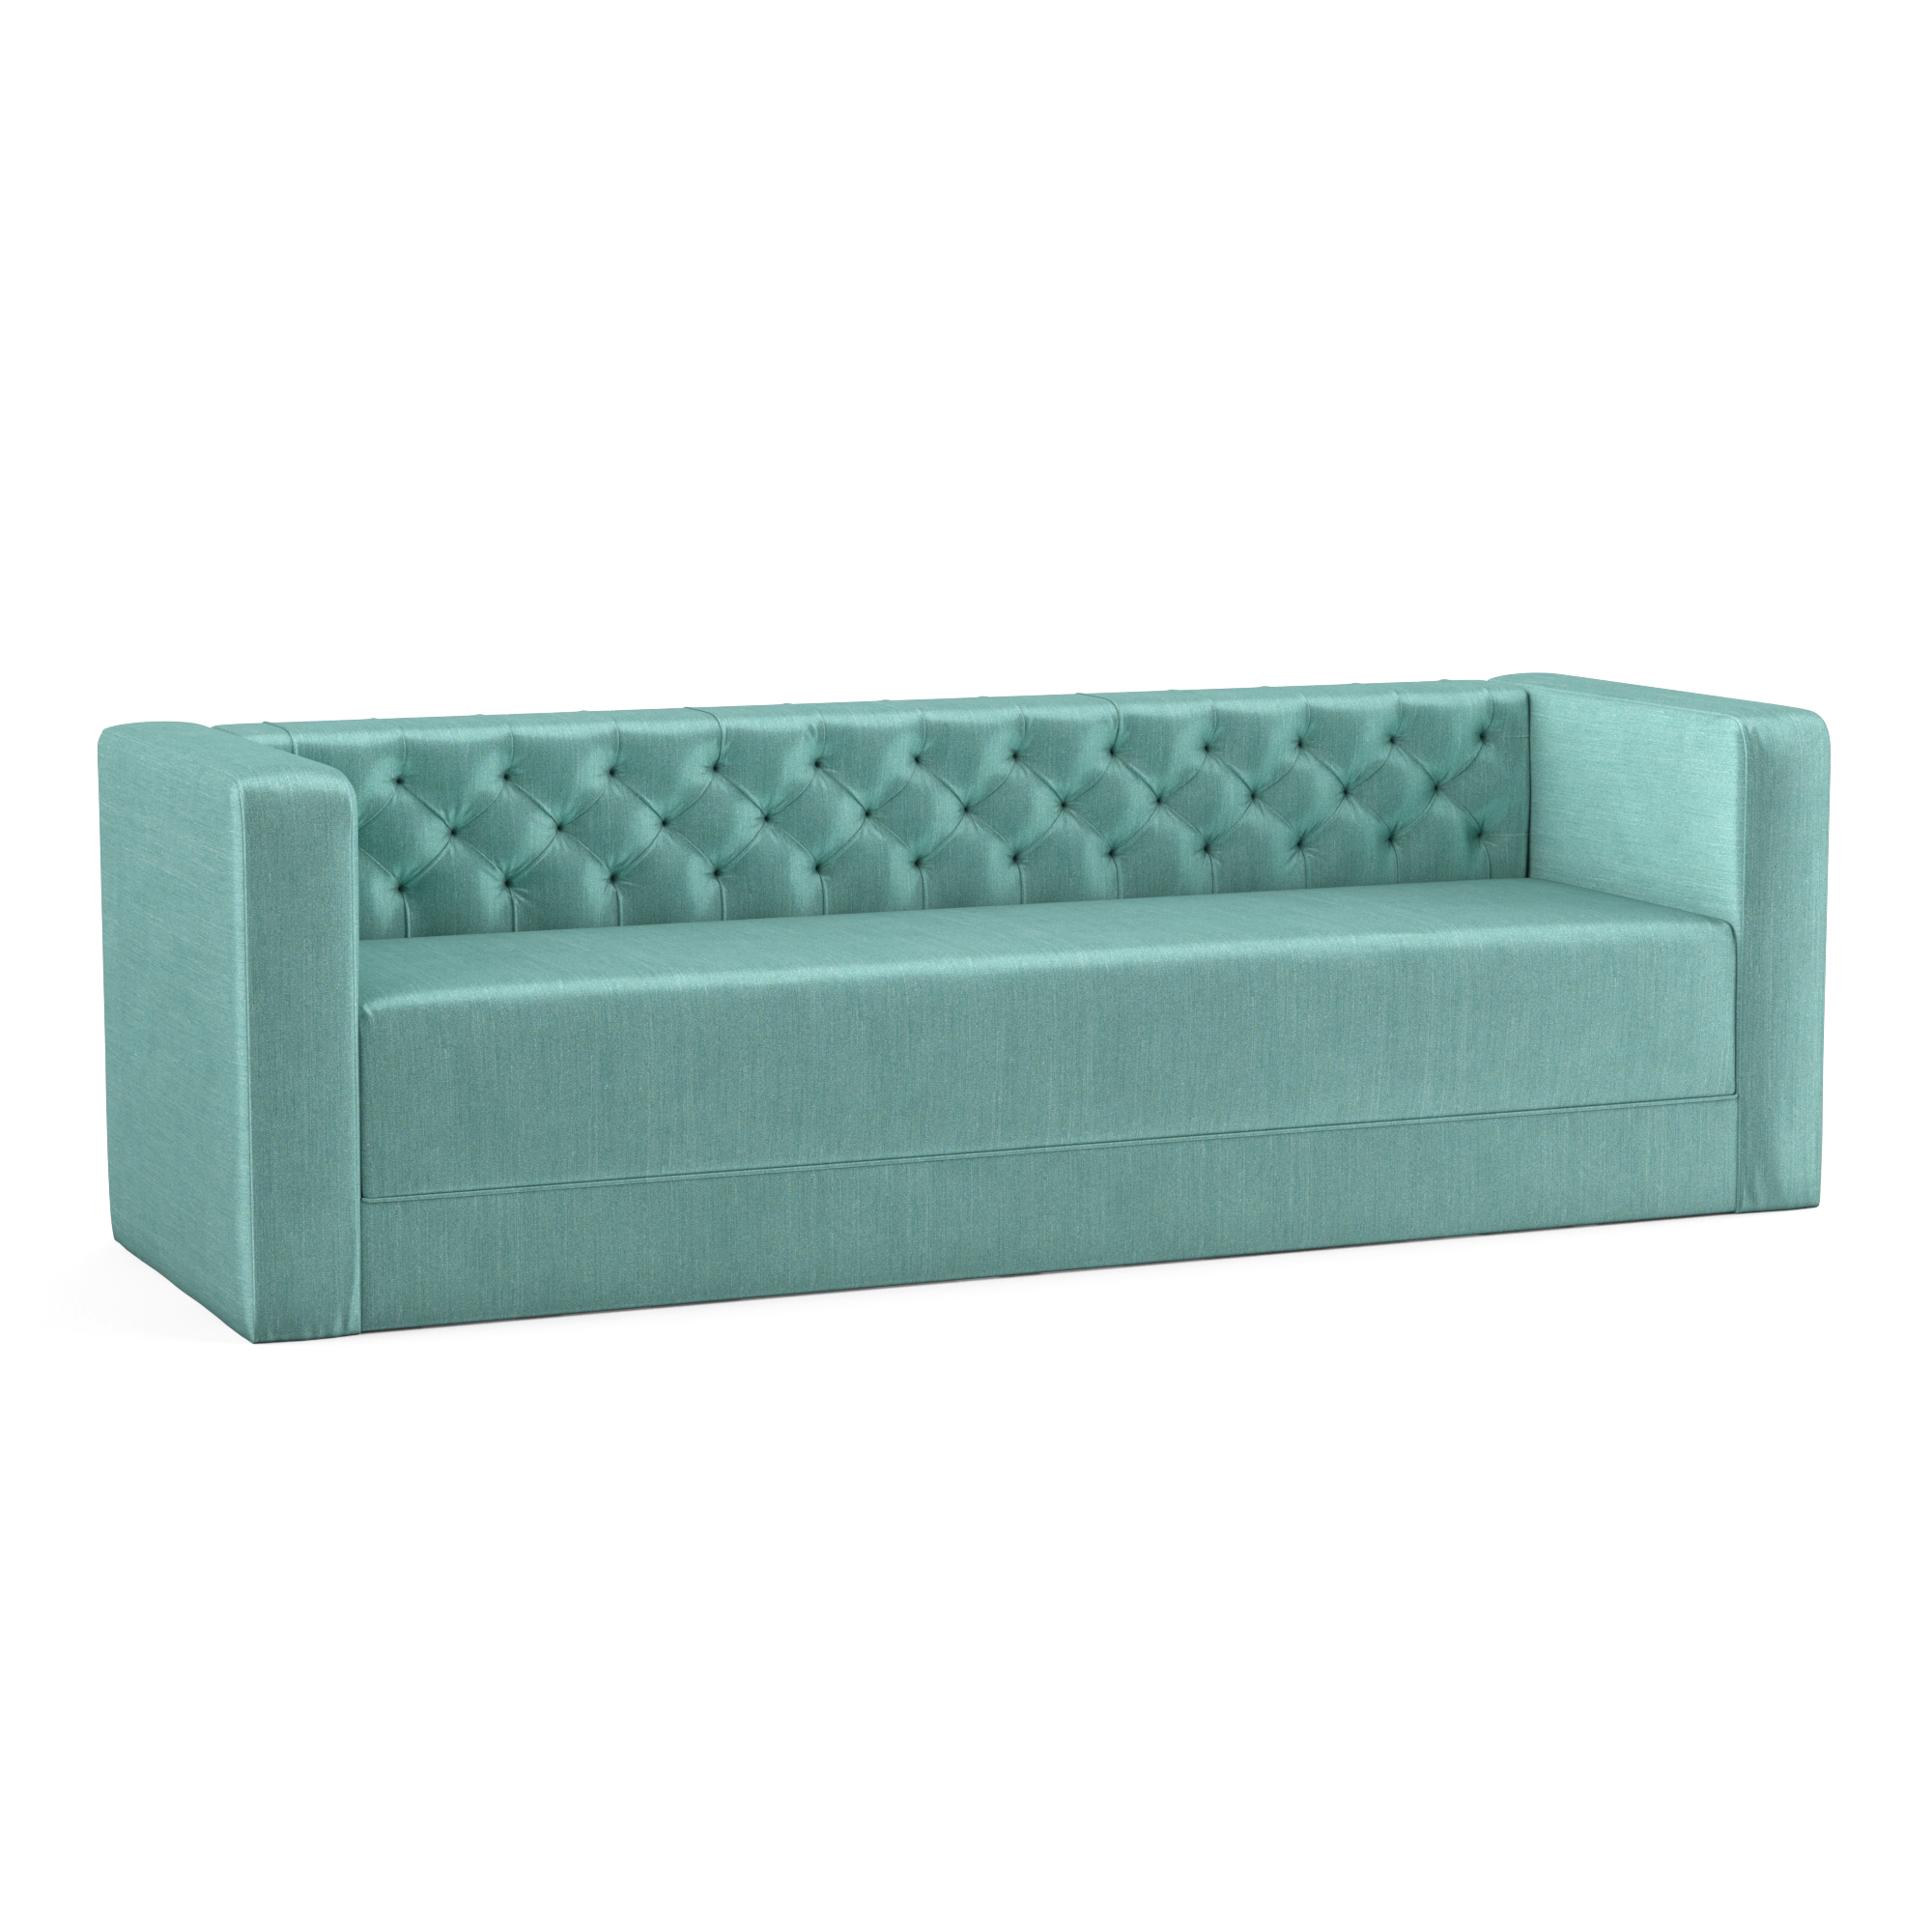 commercial sofa with diamond tufted back and arms